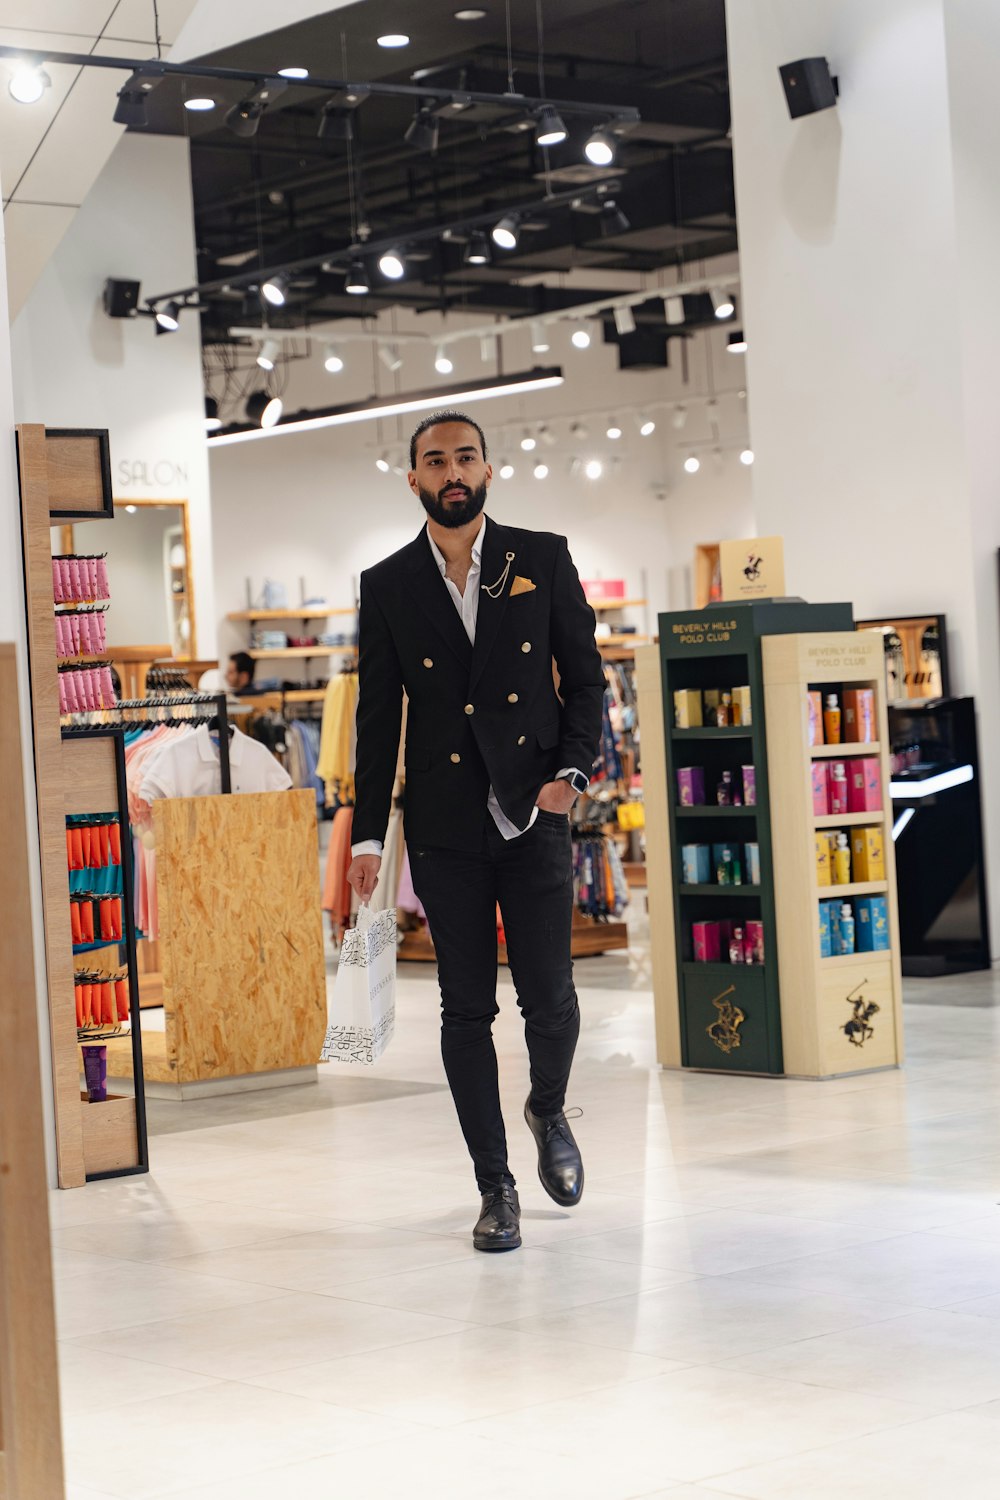 a man in a suit walks through a store